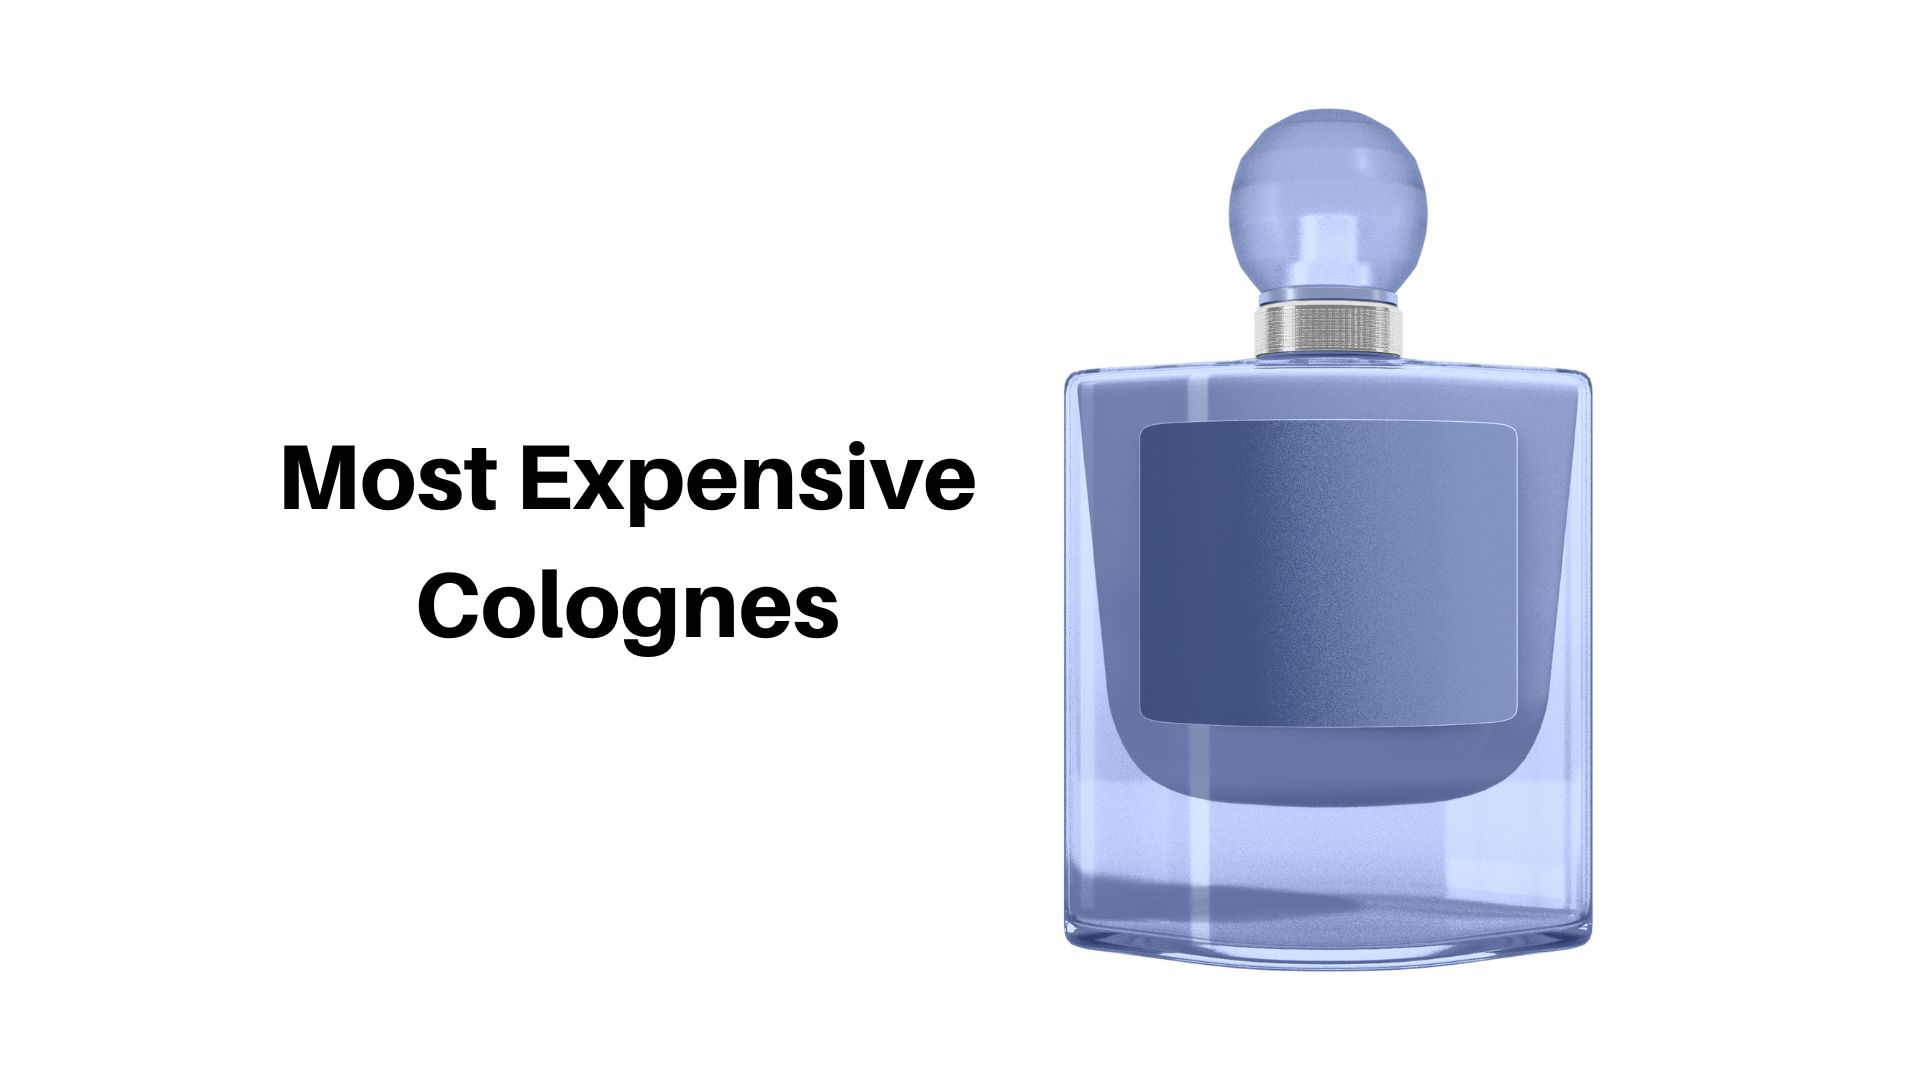 Top 10 Most Expensive Perfume, Most Expensive Fragrance